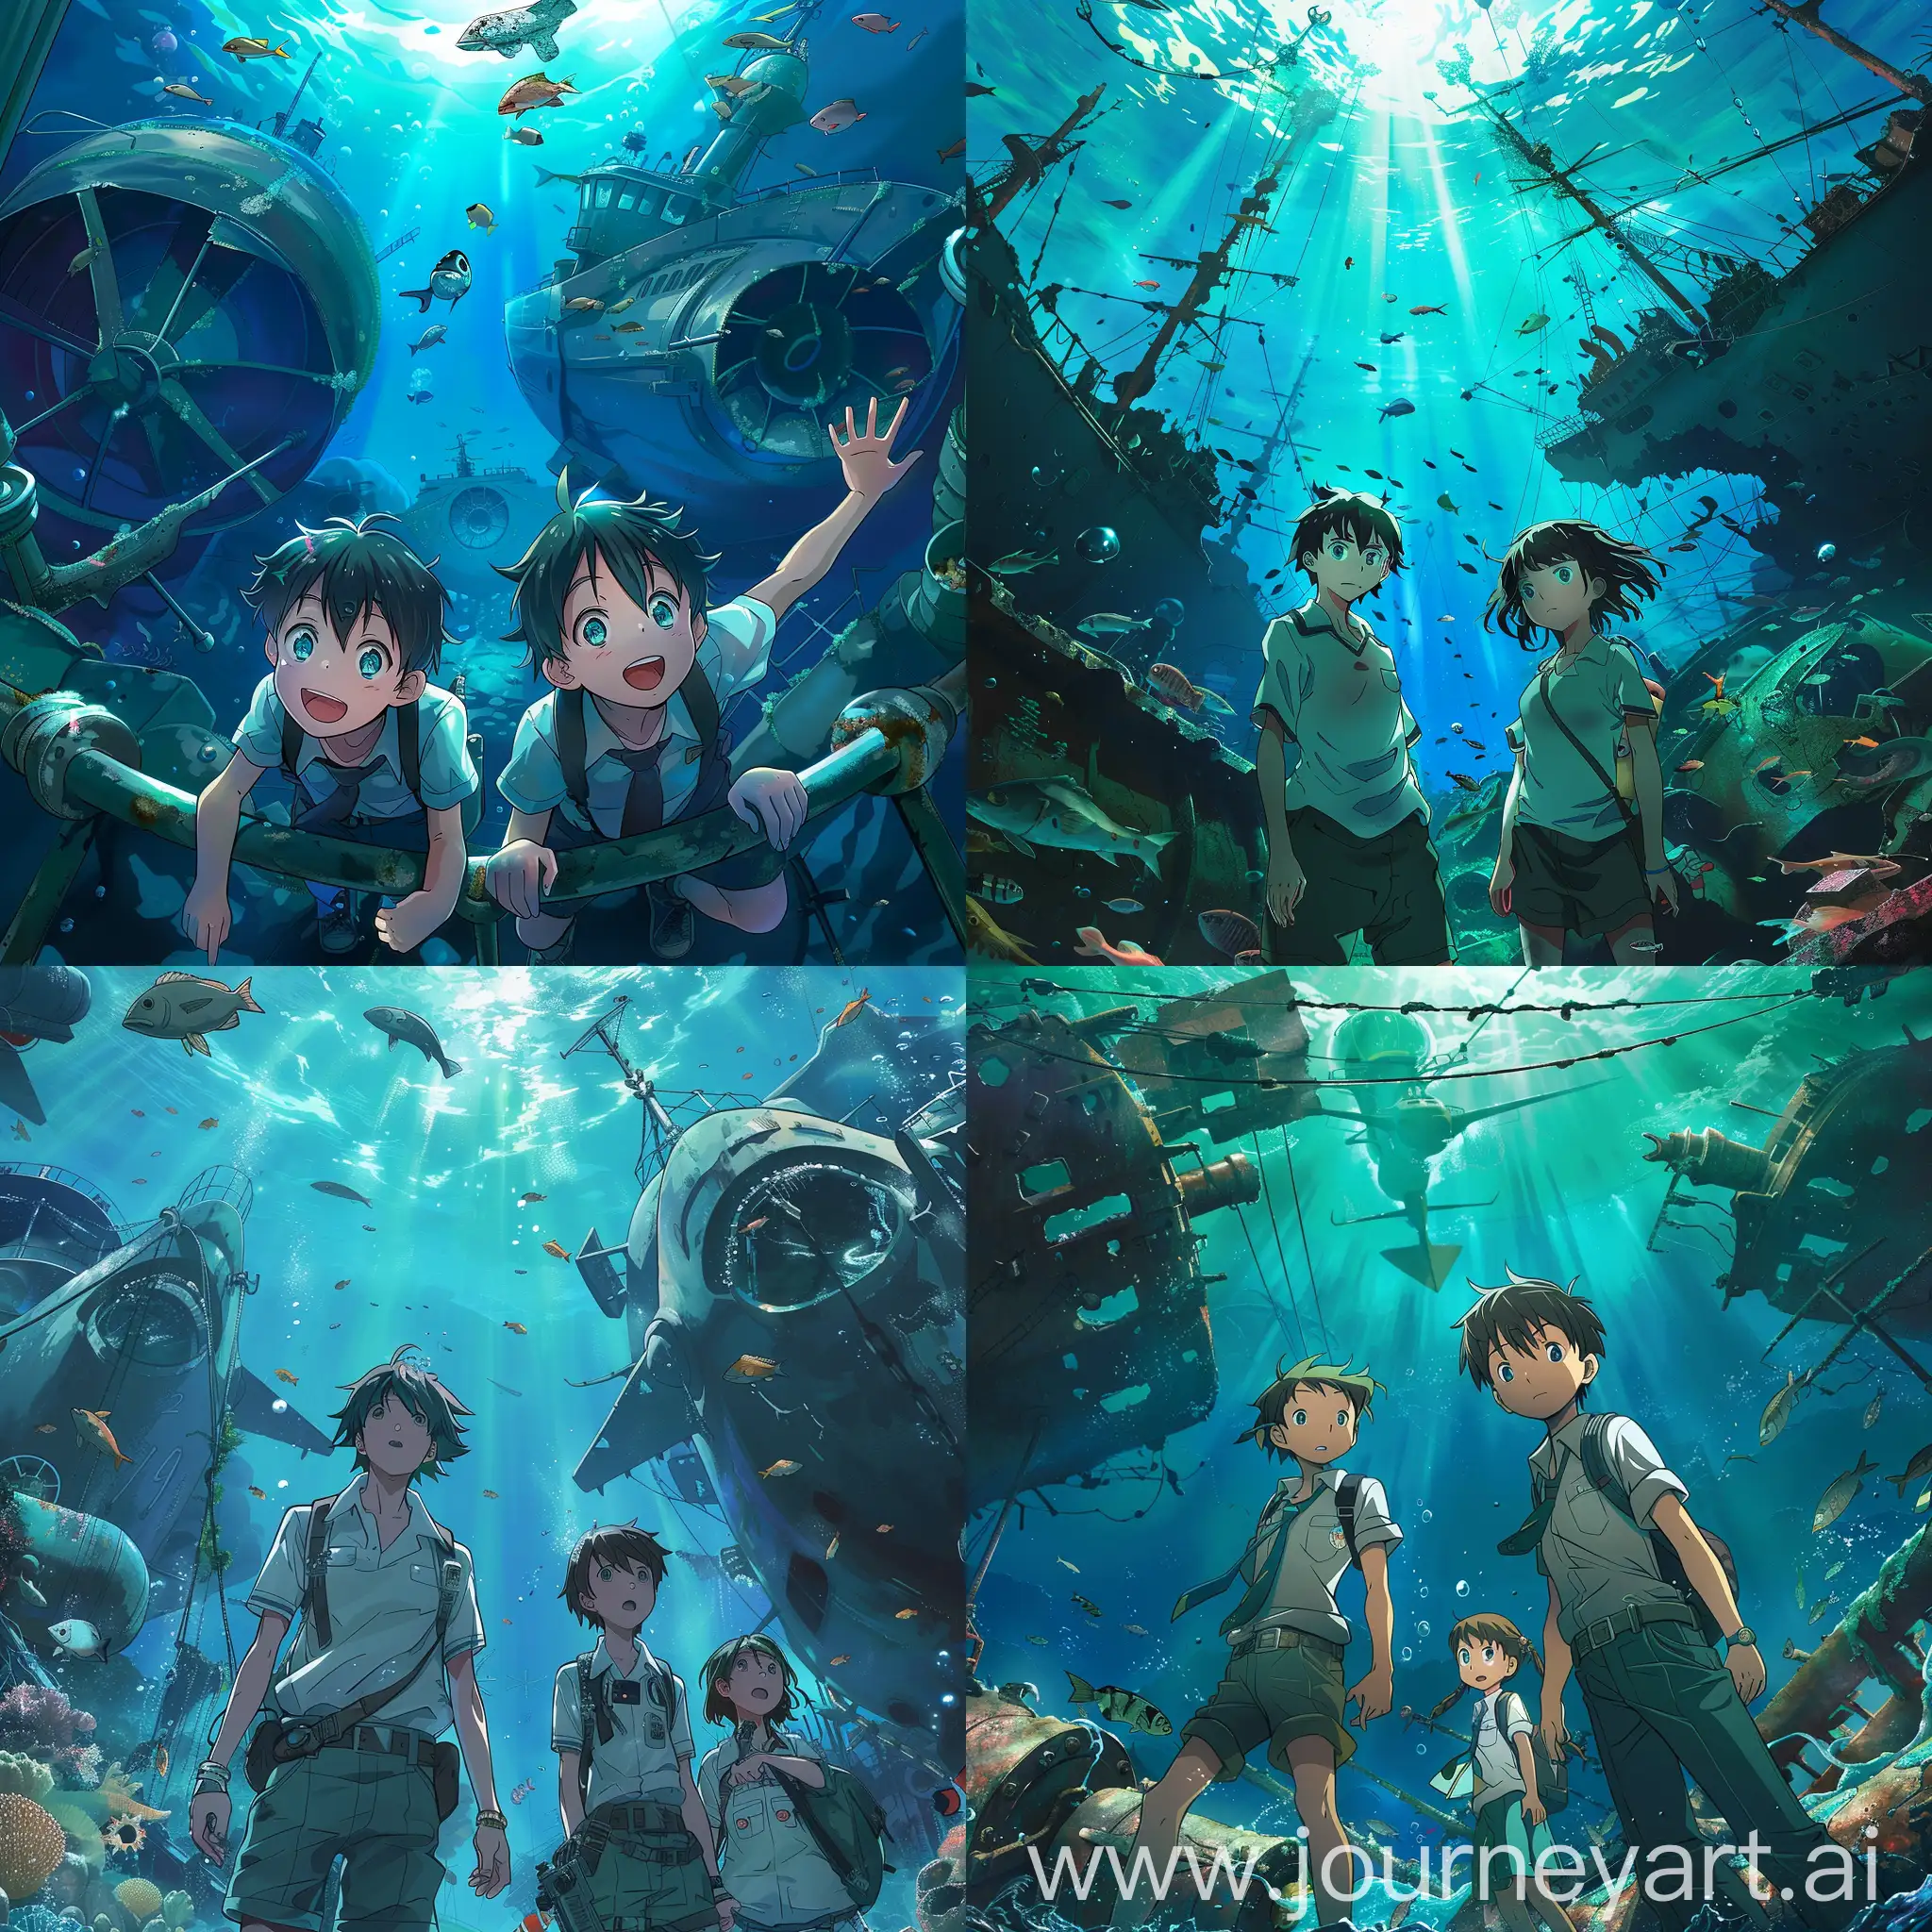 Underwater-Adventure-with-Teenagers-Exploring-Shipwrecks-in-Anime-Style